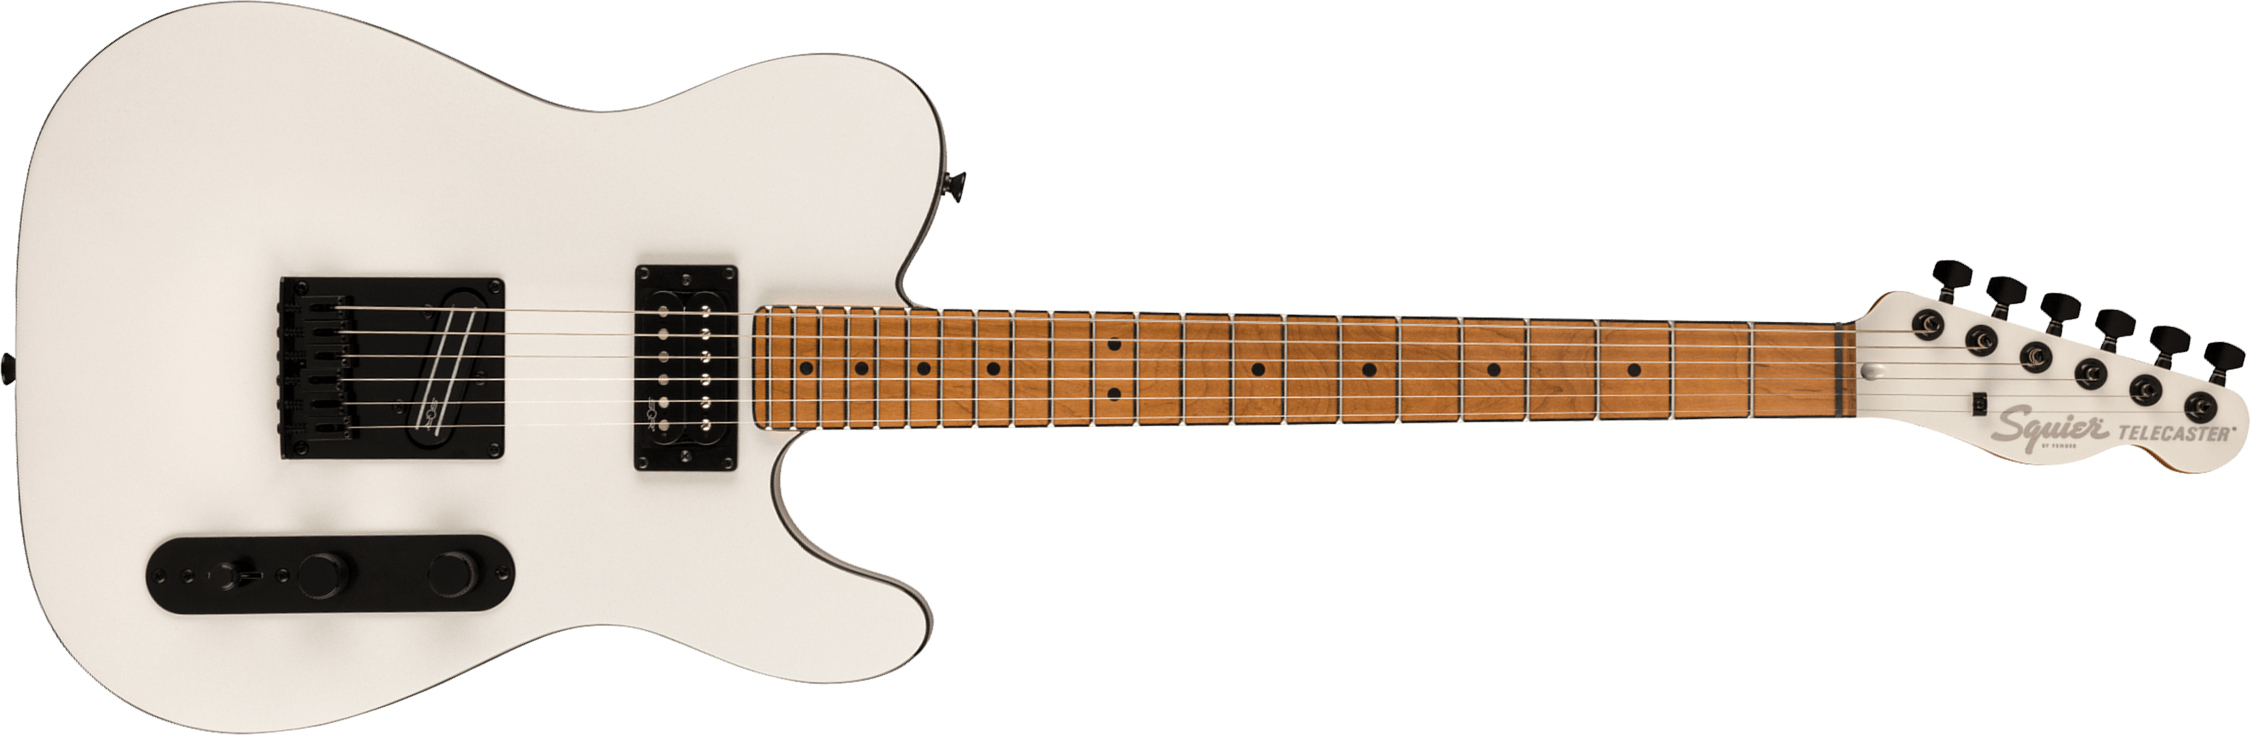 Squier Tele Contemporary Rh Hh Ht Mn - Pearl White - Tel shape electric guitar - Main picture